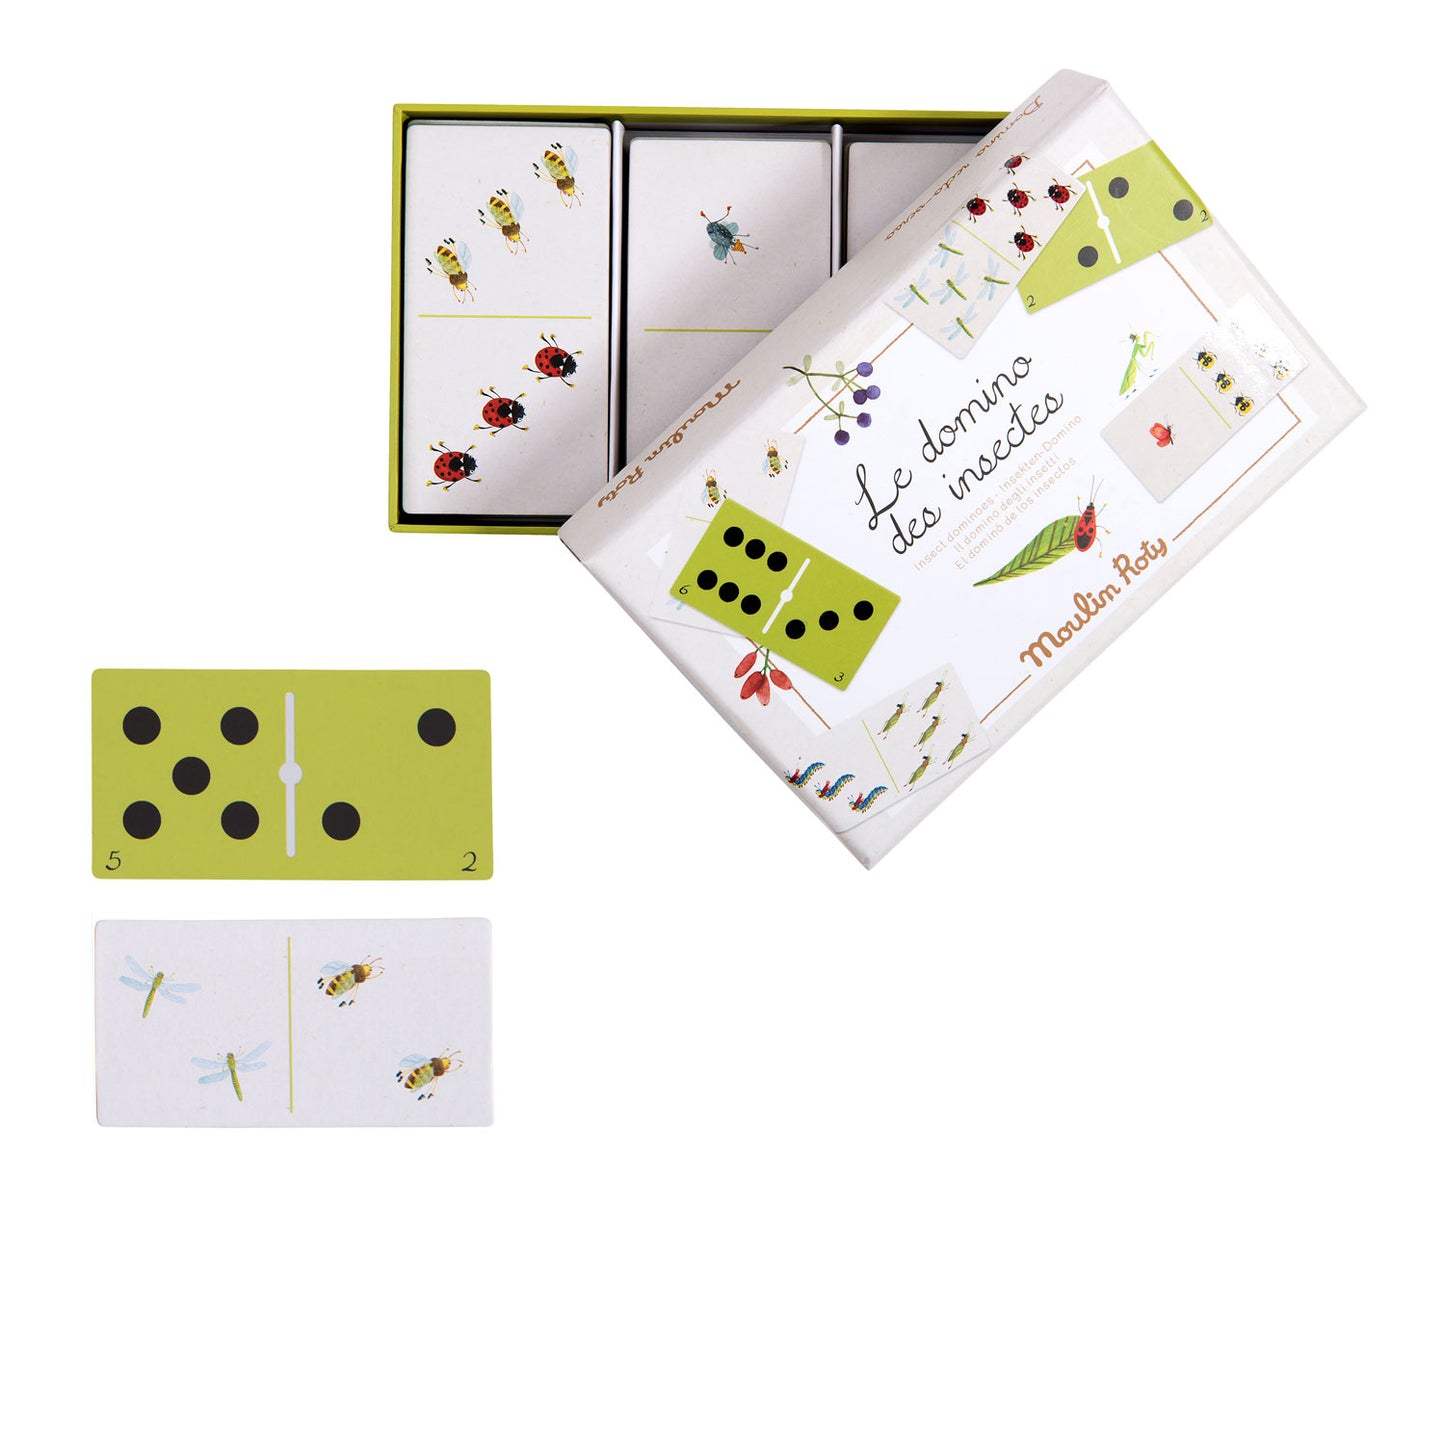 Le Jardin Insect Dominoes